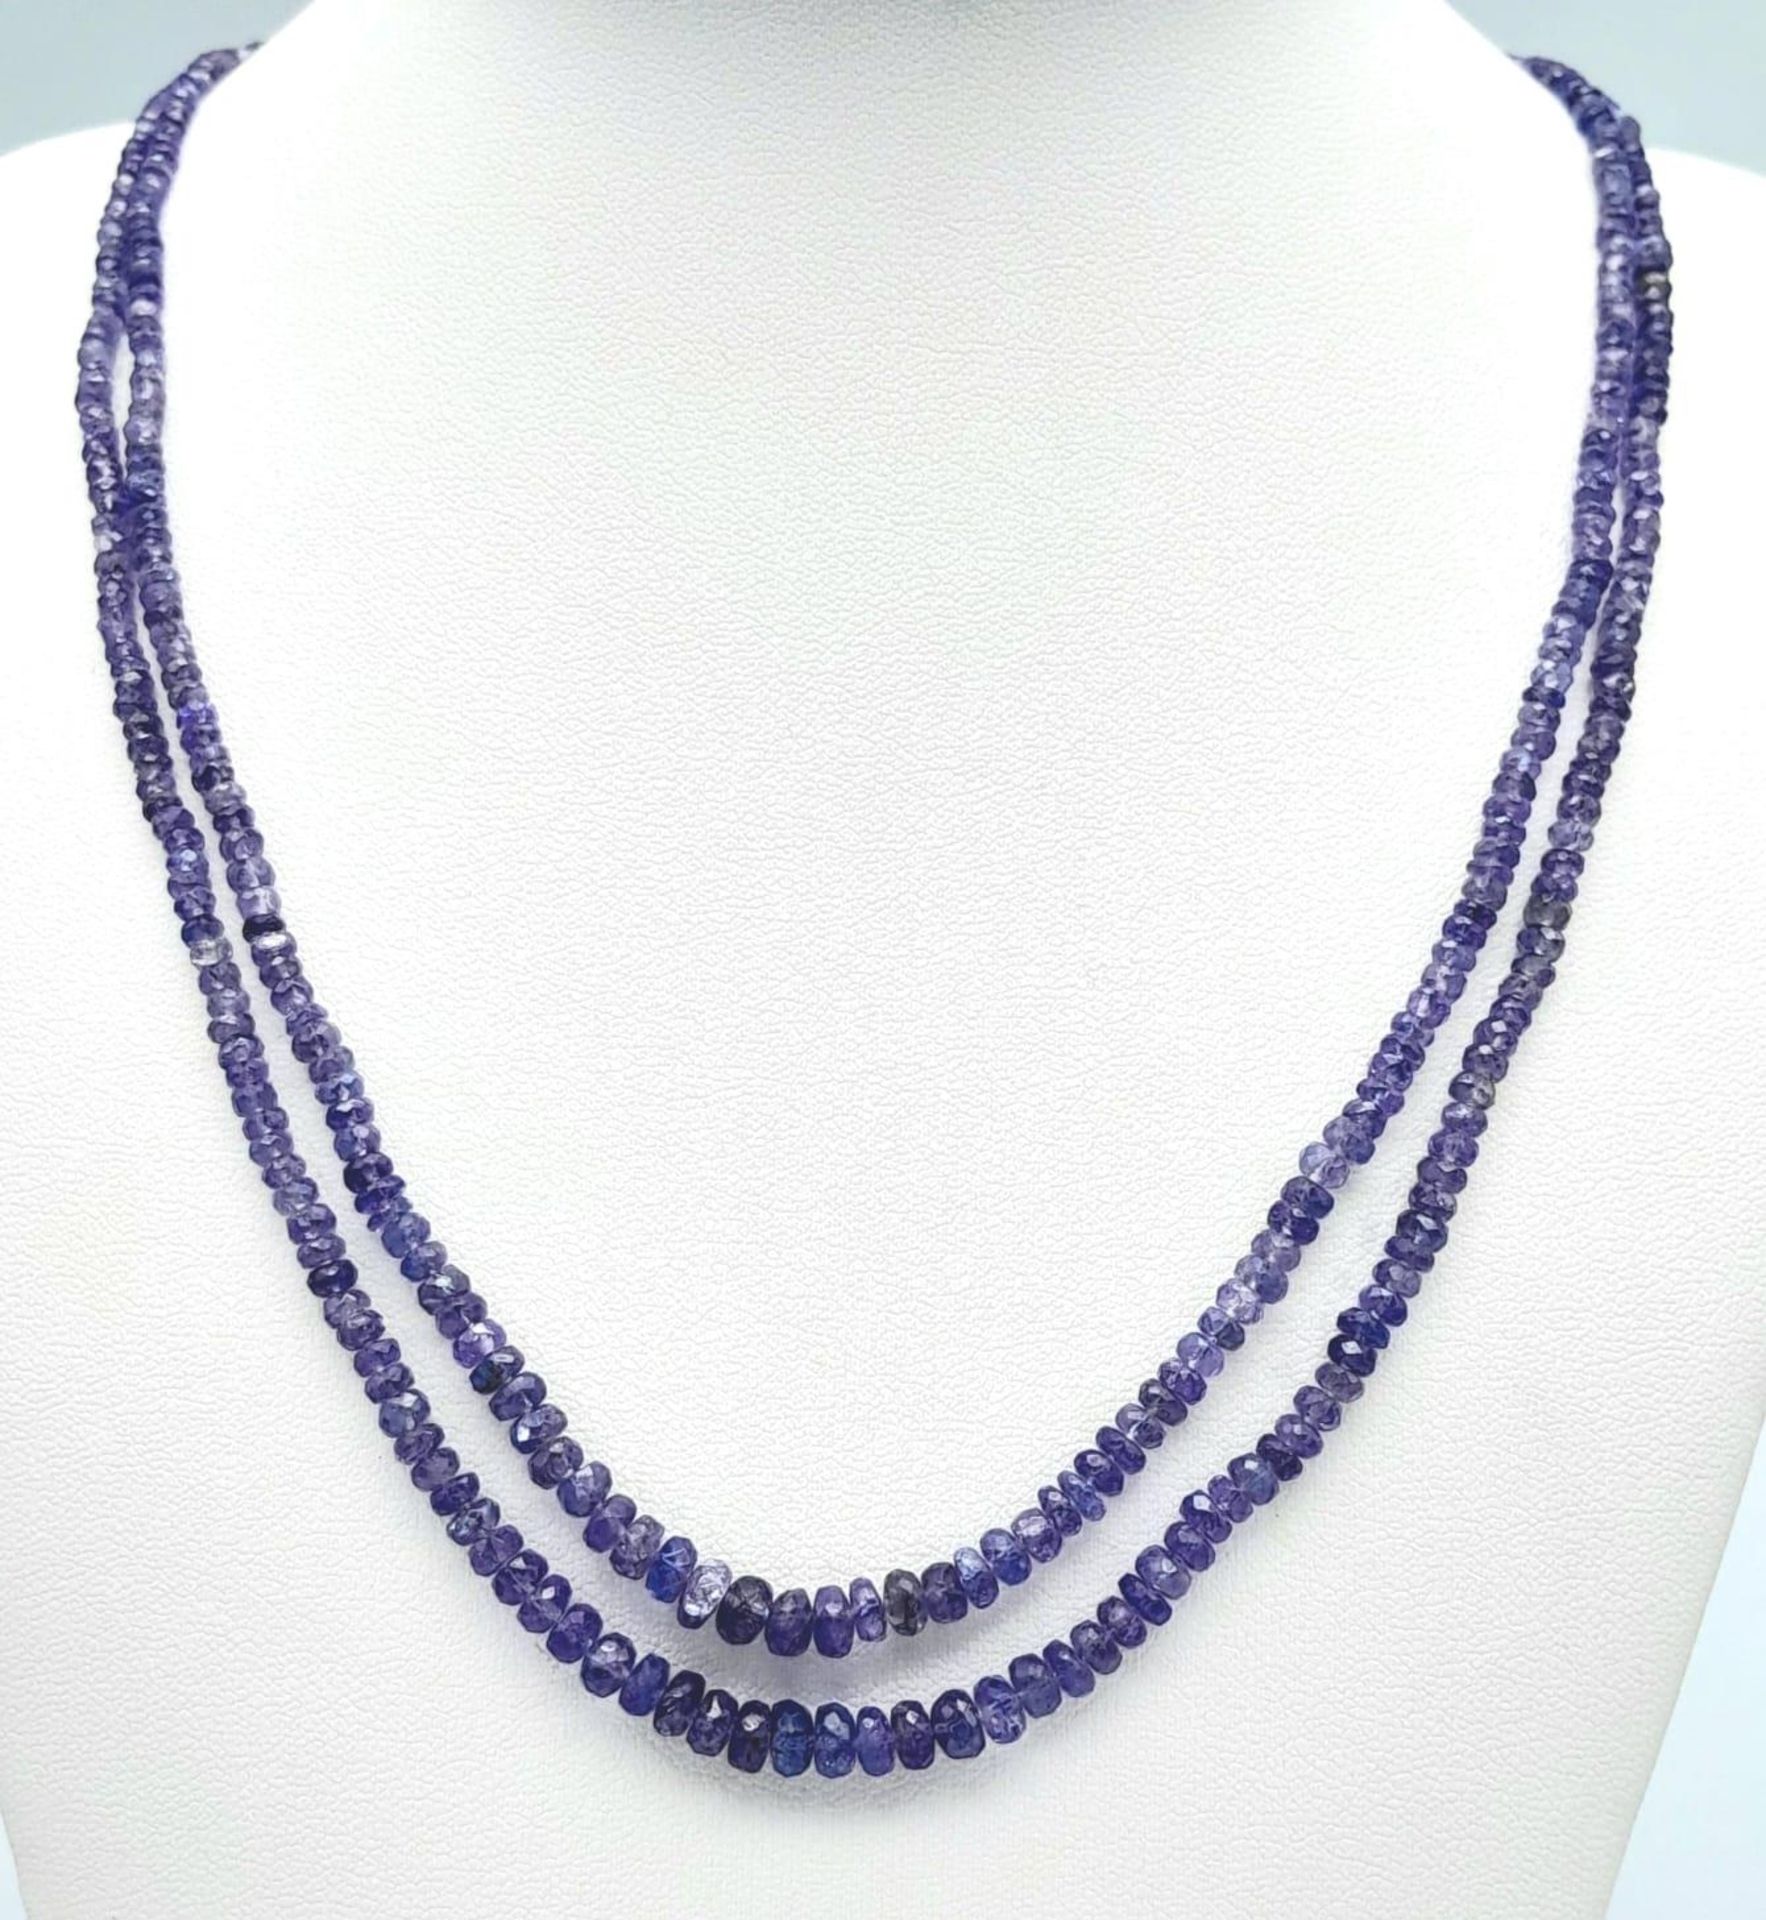 A 100ctw Two Row Tanzanite Necklace with a Sapphire and 925 Silver Clasp. 48cm length, 20.3g total - Bild 2 aus 6